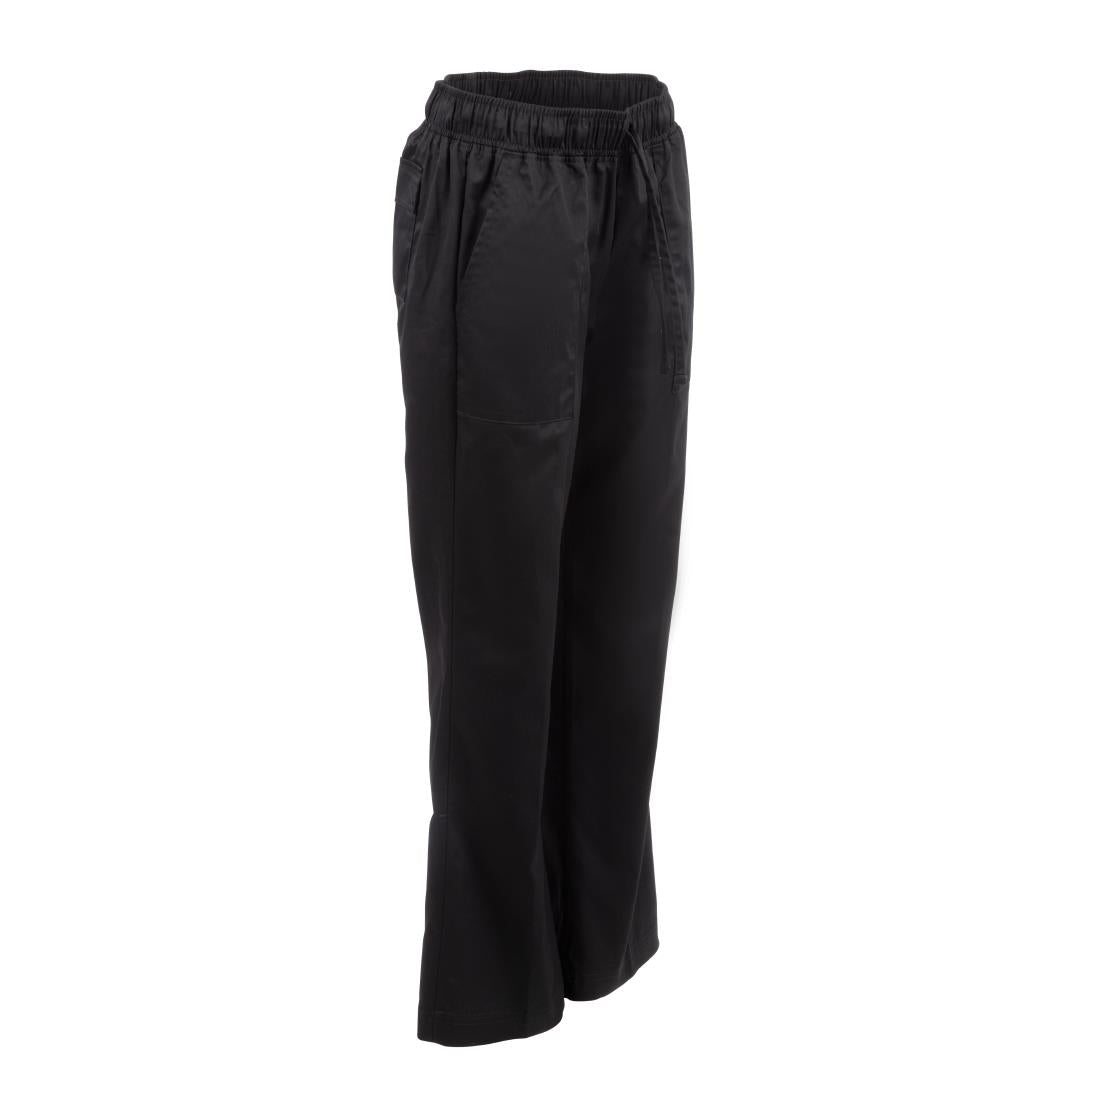 A431-L Chef Works Womens Executive Chef Trousers Black L